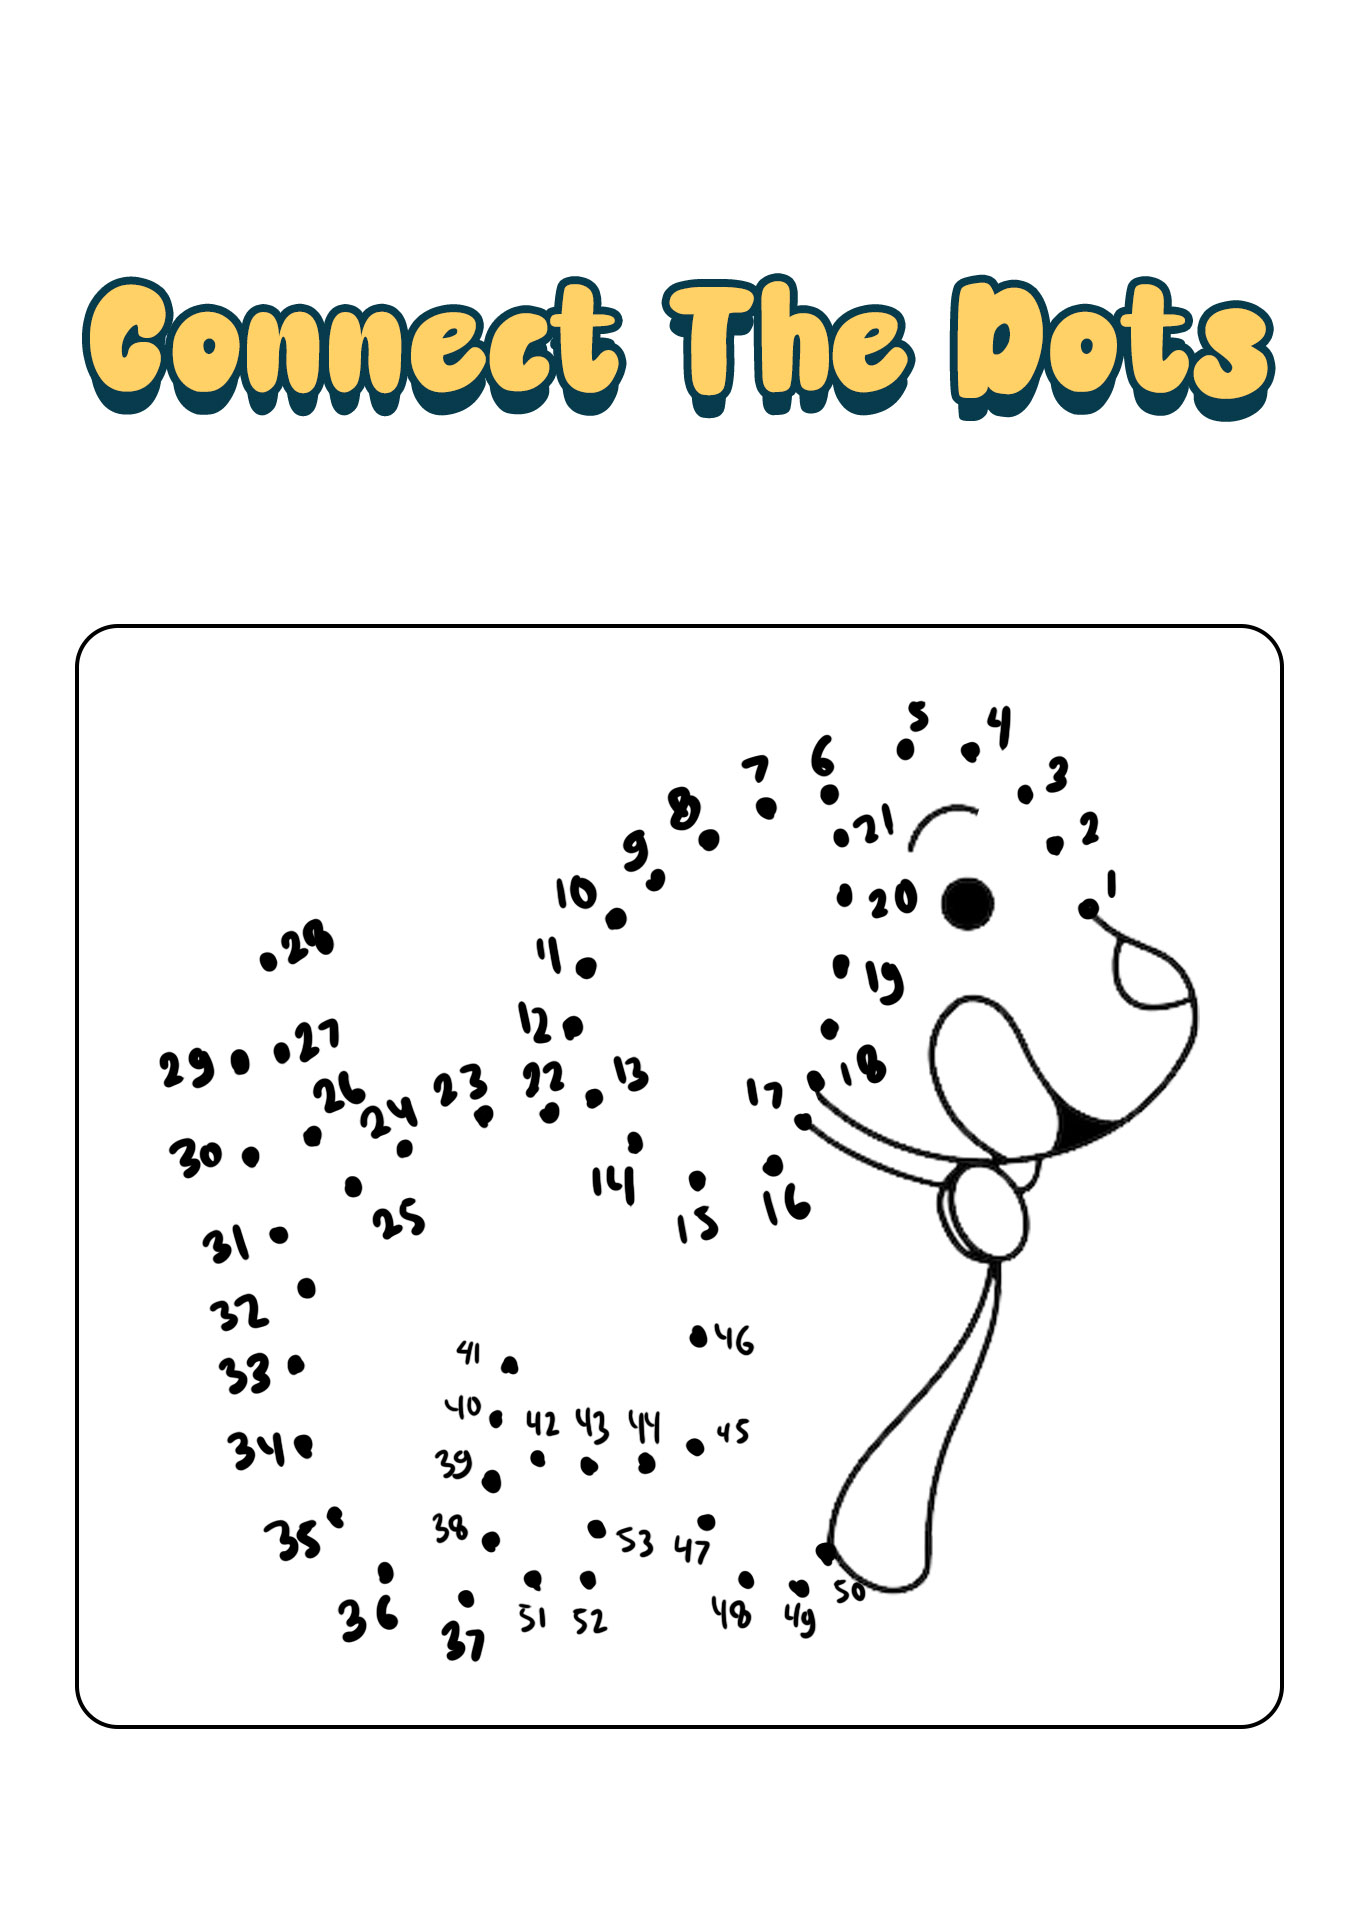 Preschool Connect the Dots Worksheets Printable Image